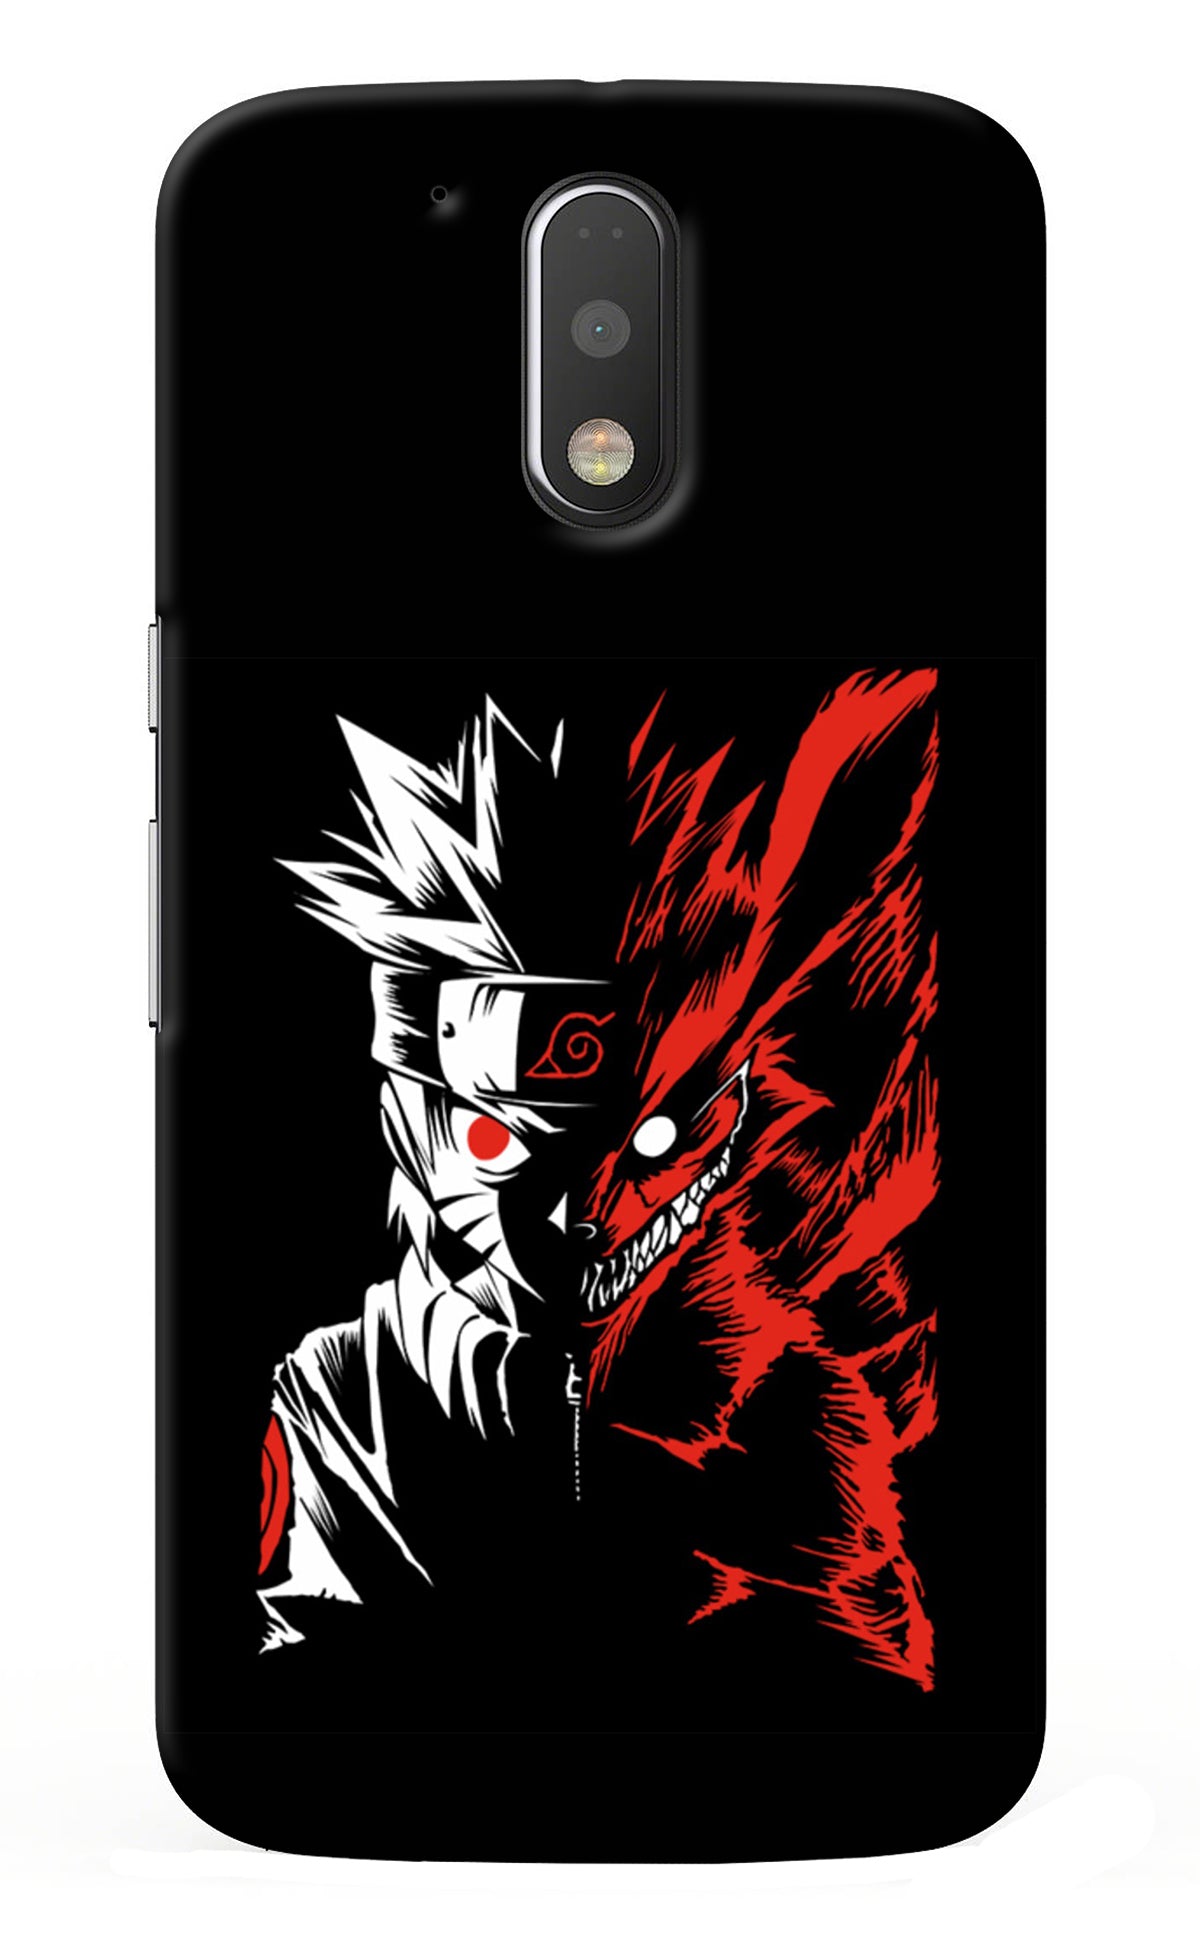 Naruto Two Face Moto G4/G4 plus Back Cover